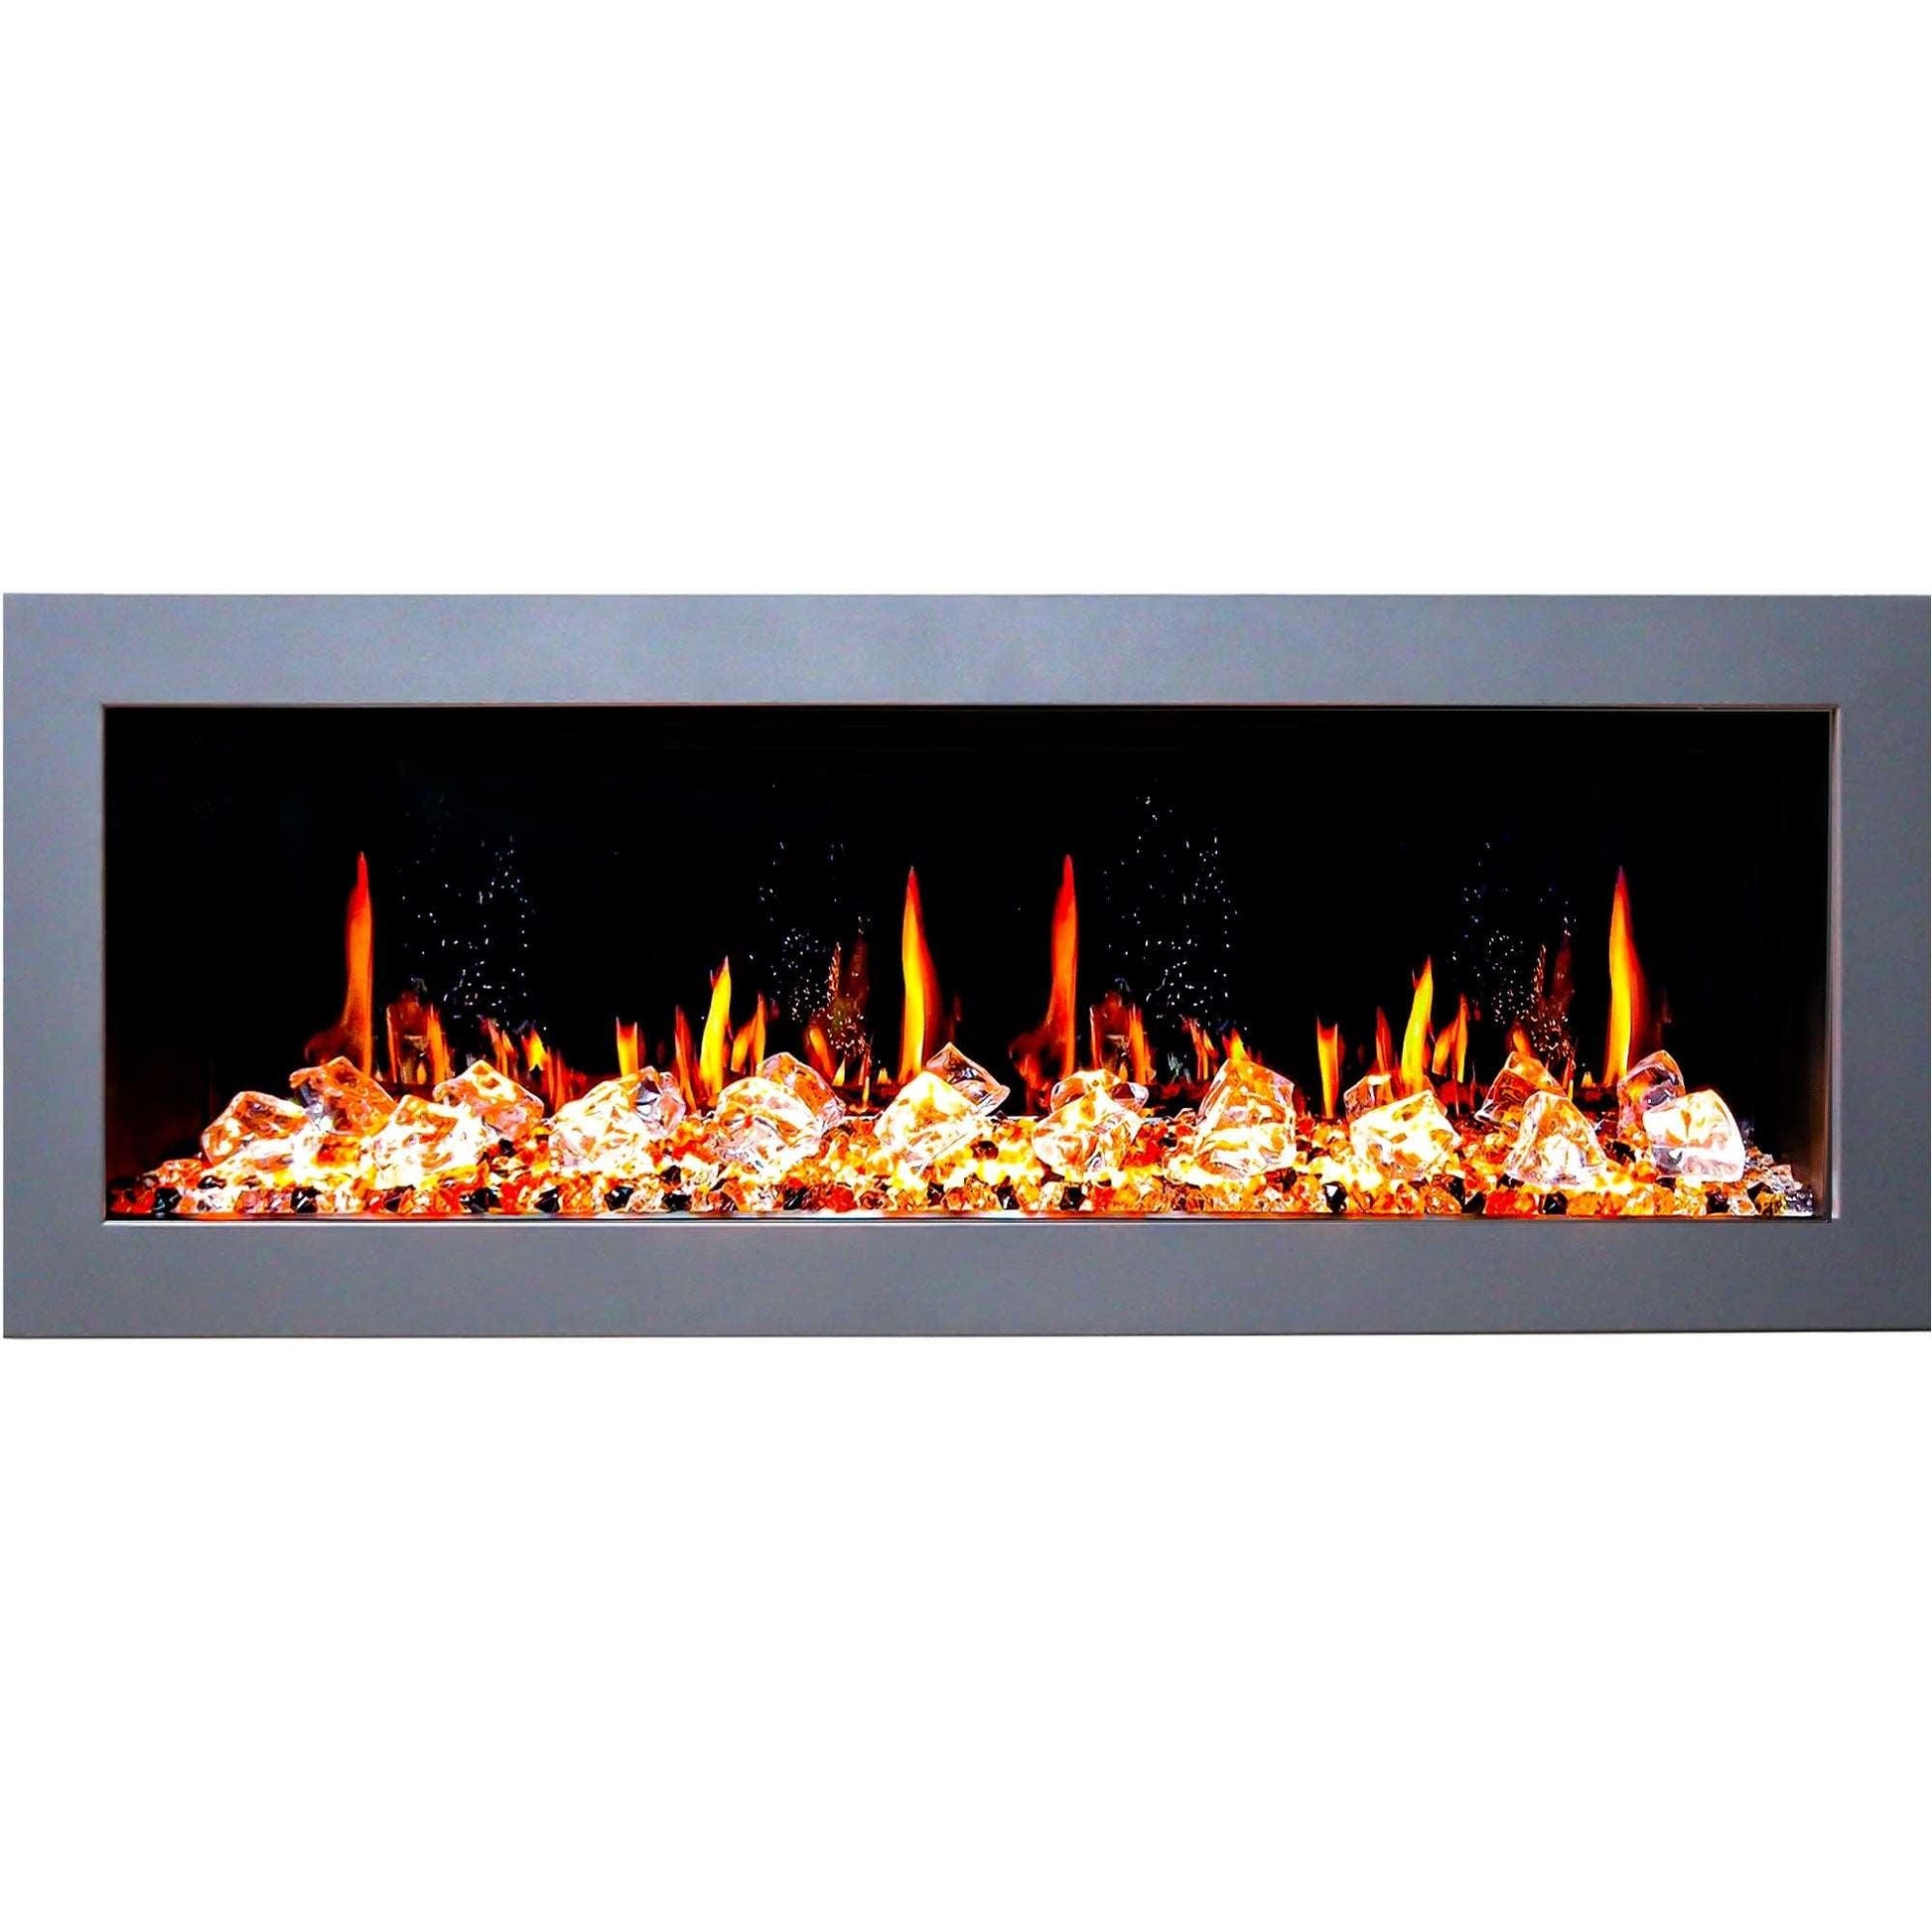 ZopaFlame™ 58" Linear Wall-mount Electric Fireplace - SC19588V - ZopaFlame Fireplaces